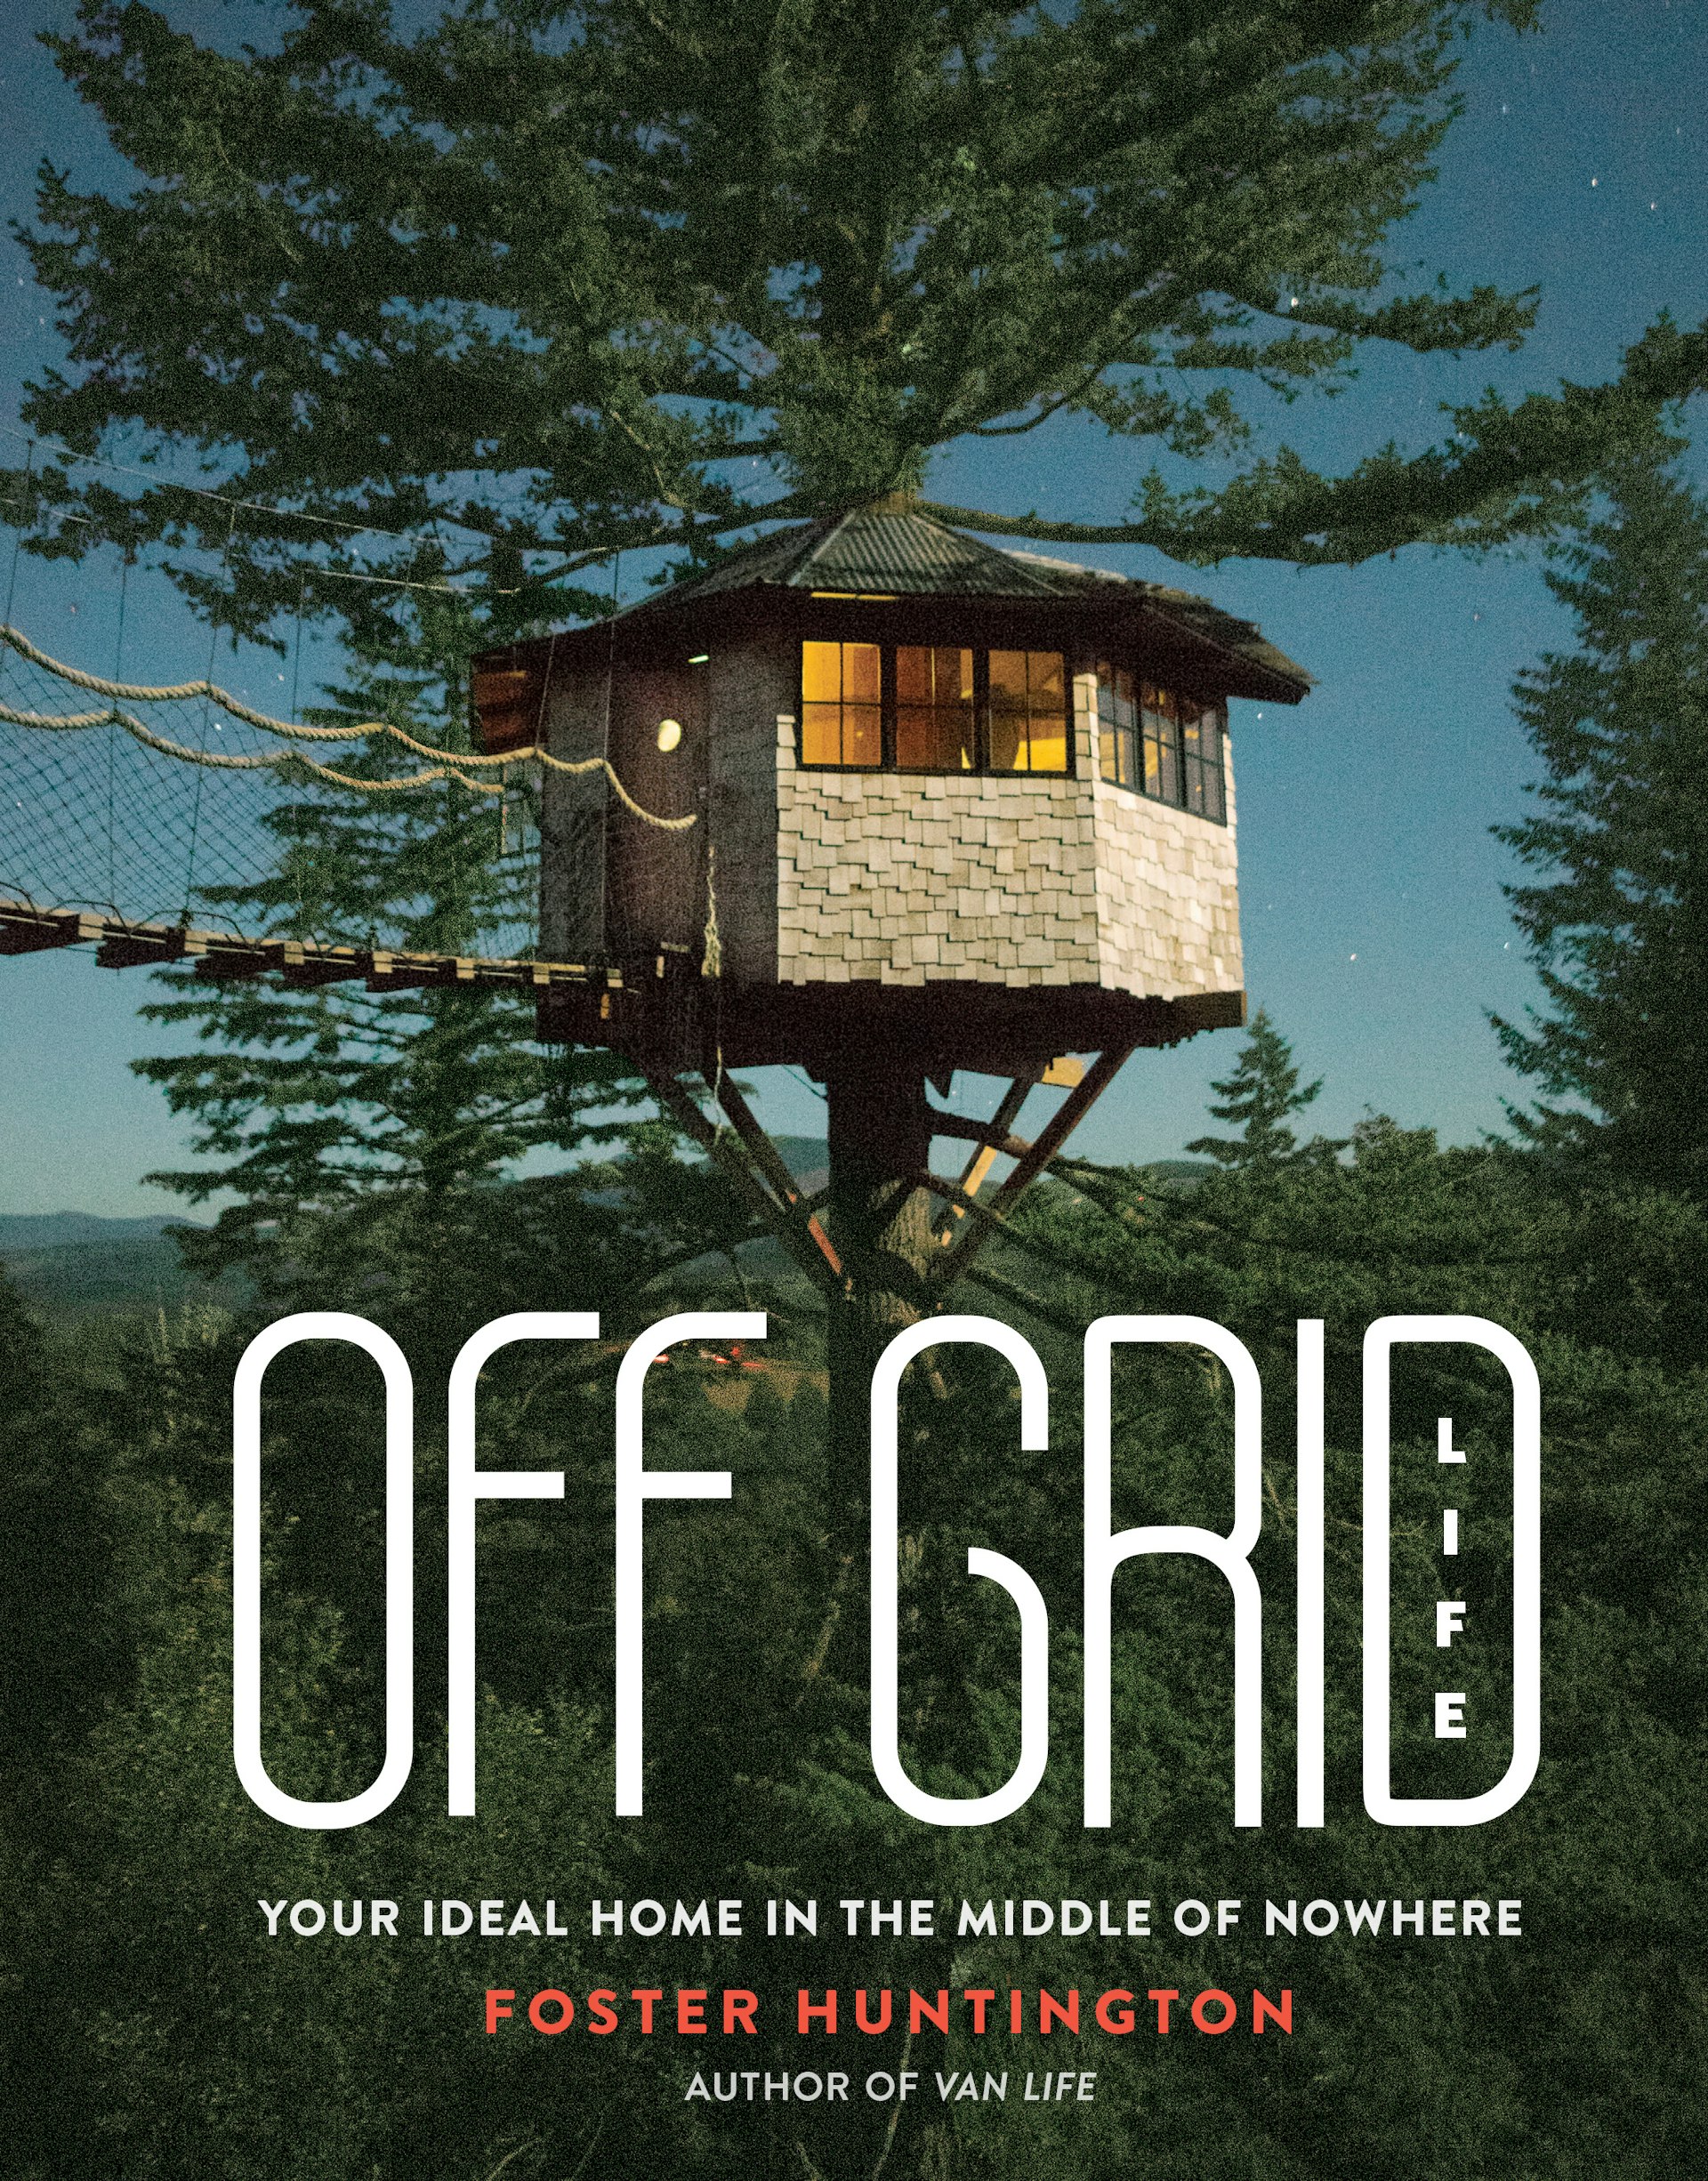 Book cover showing a cabin with a rope bridge set high up in a Douglas fir tree